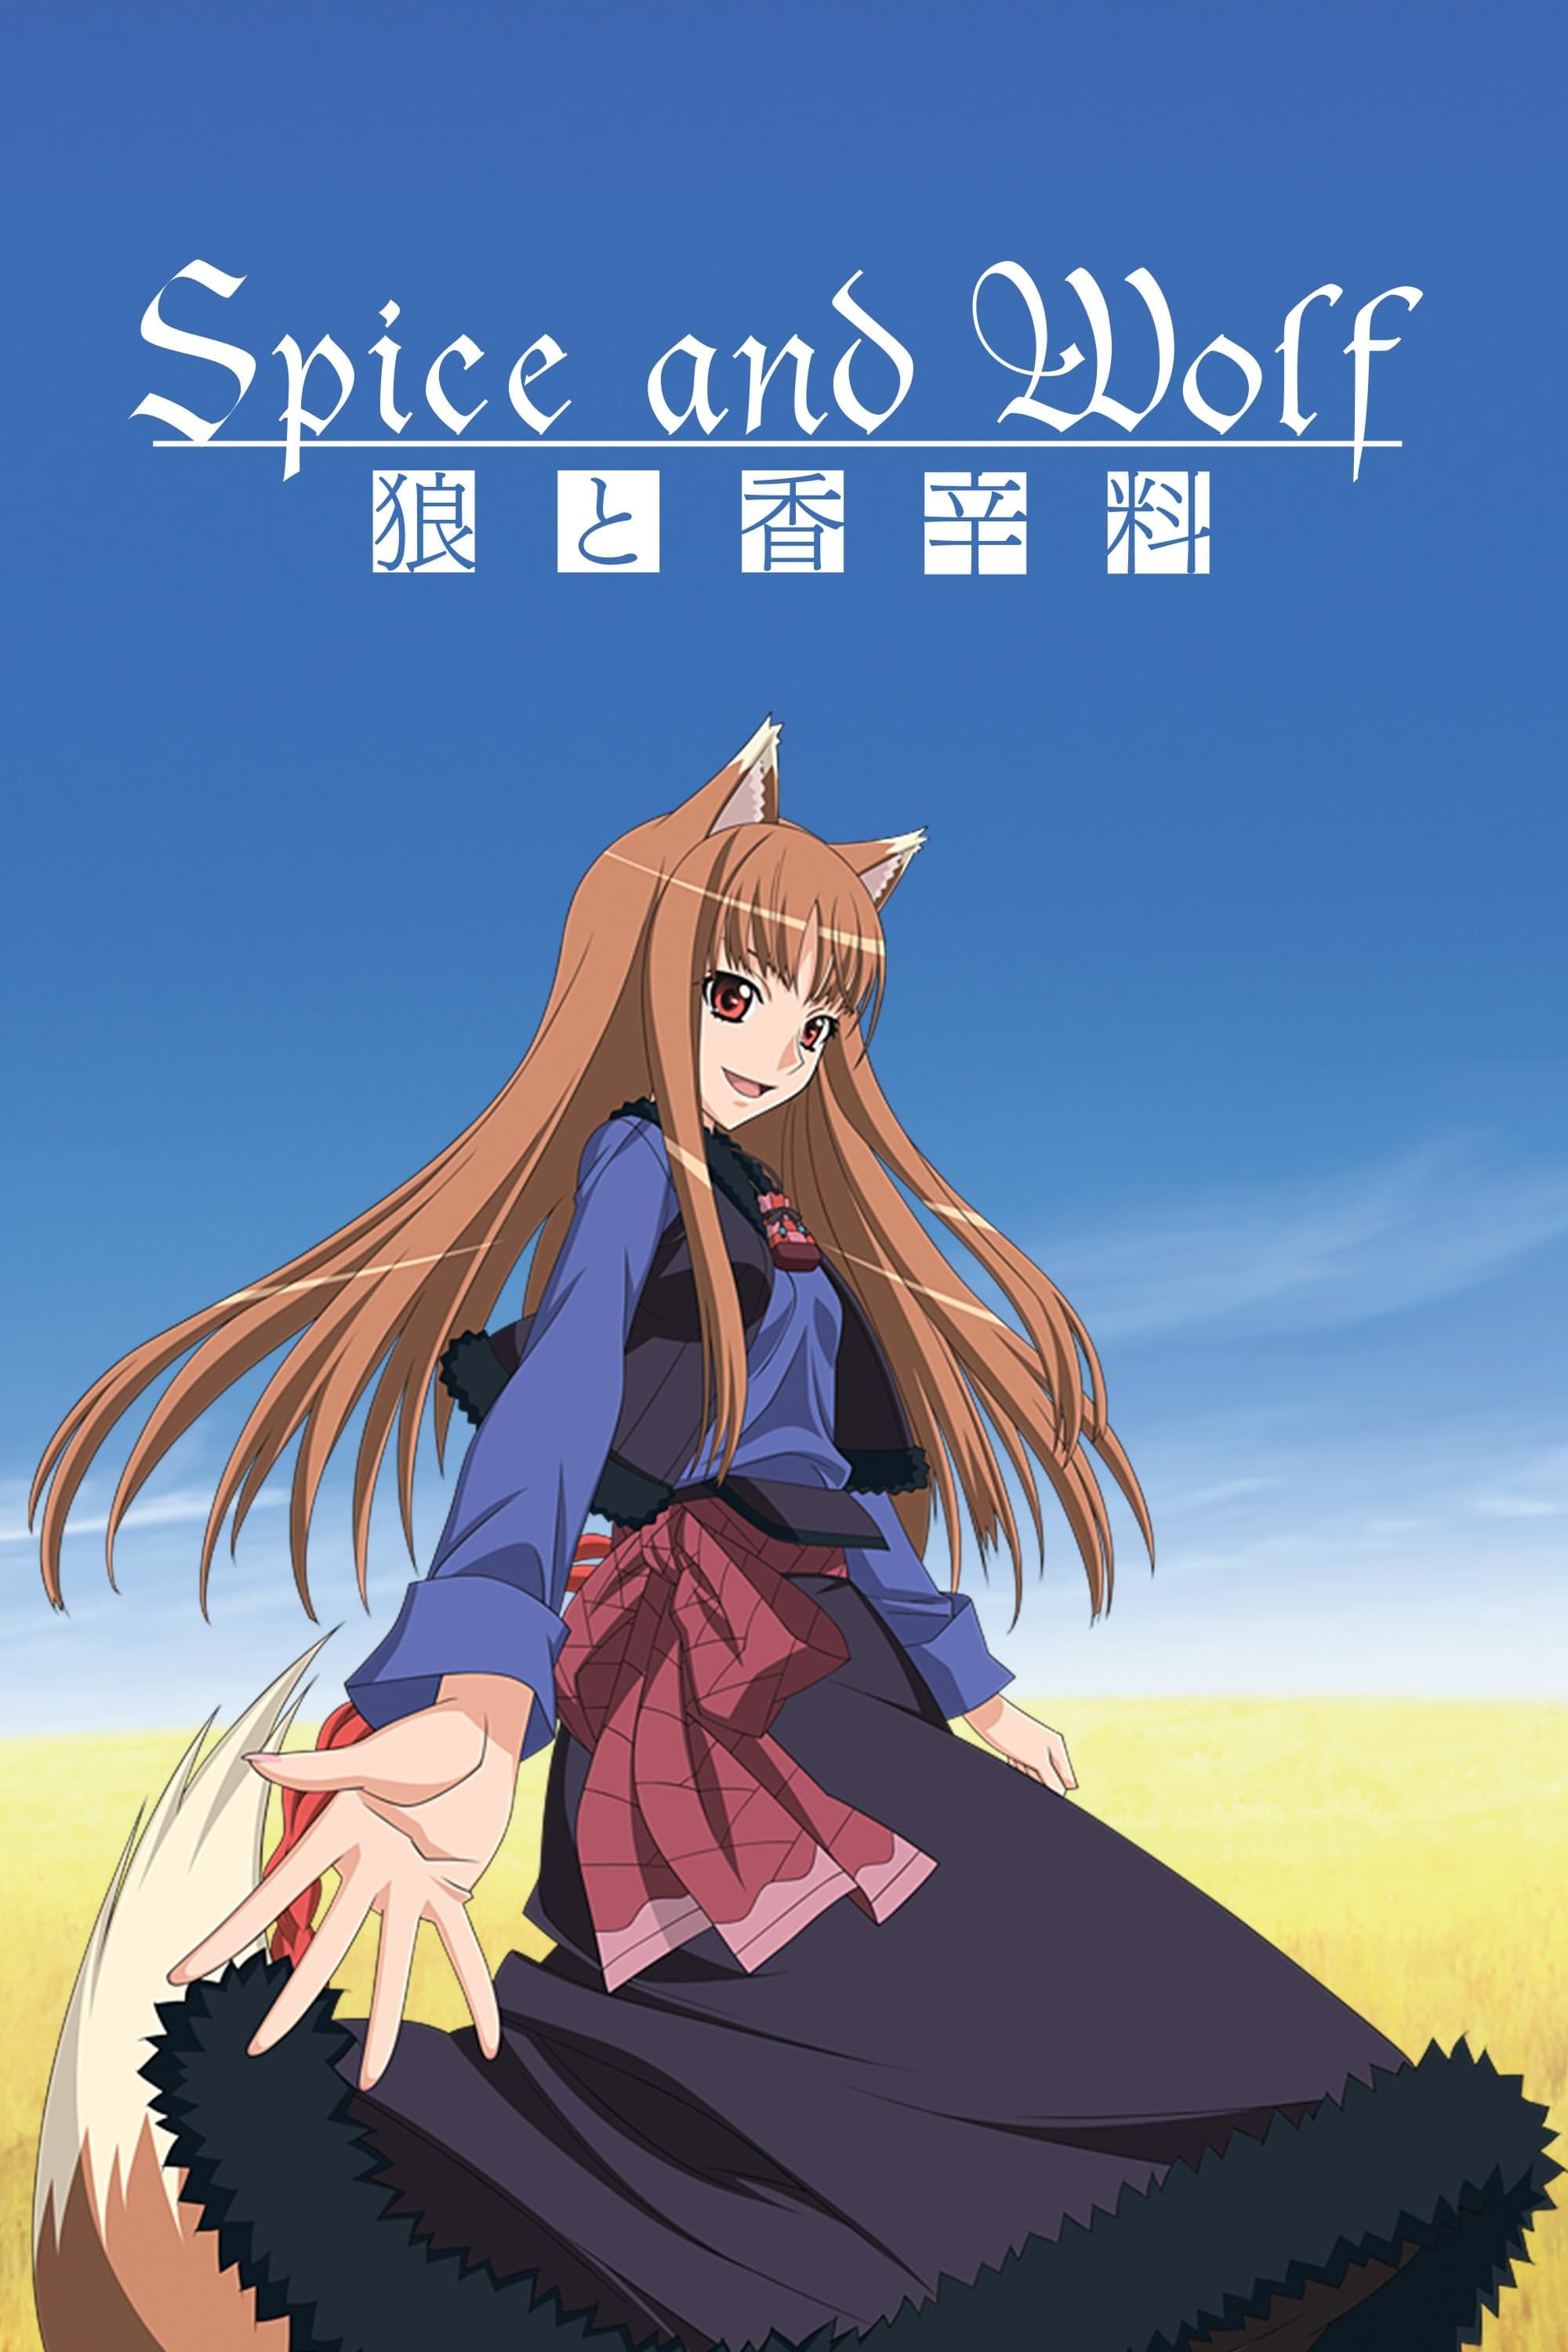 [Most Viewed] Spice and Wolf (TV) (Sub)